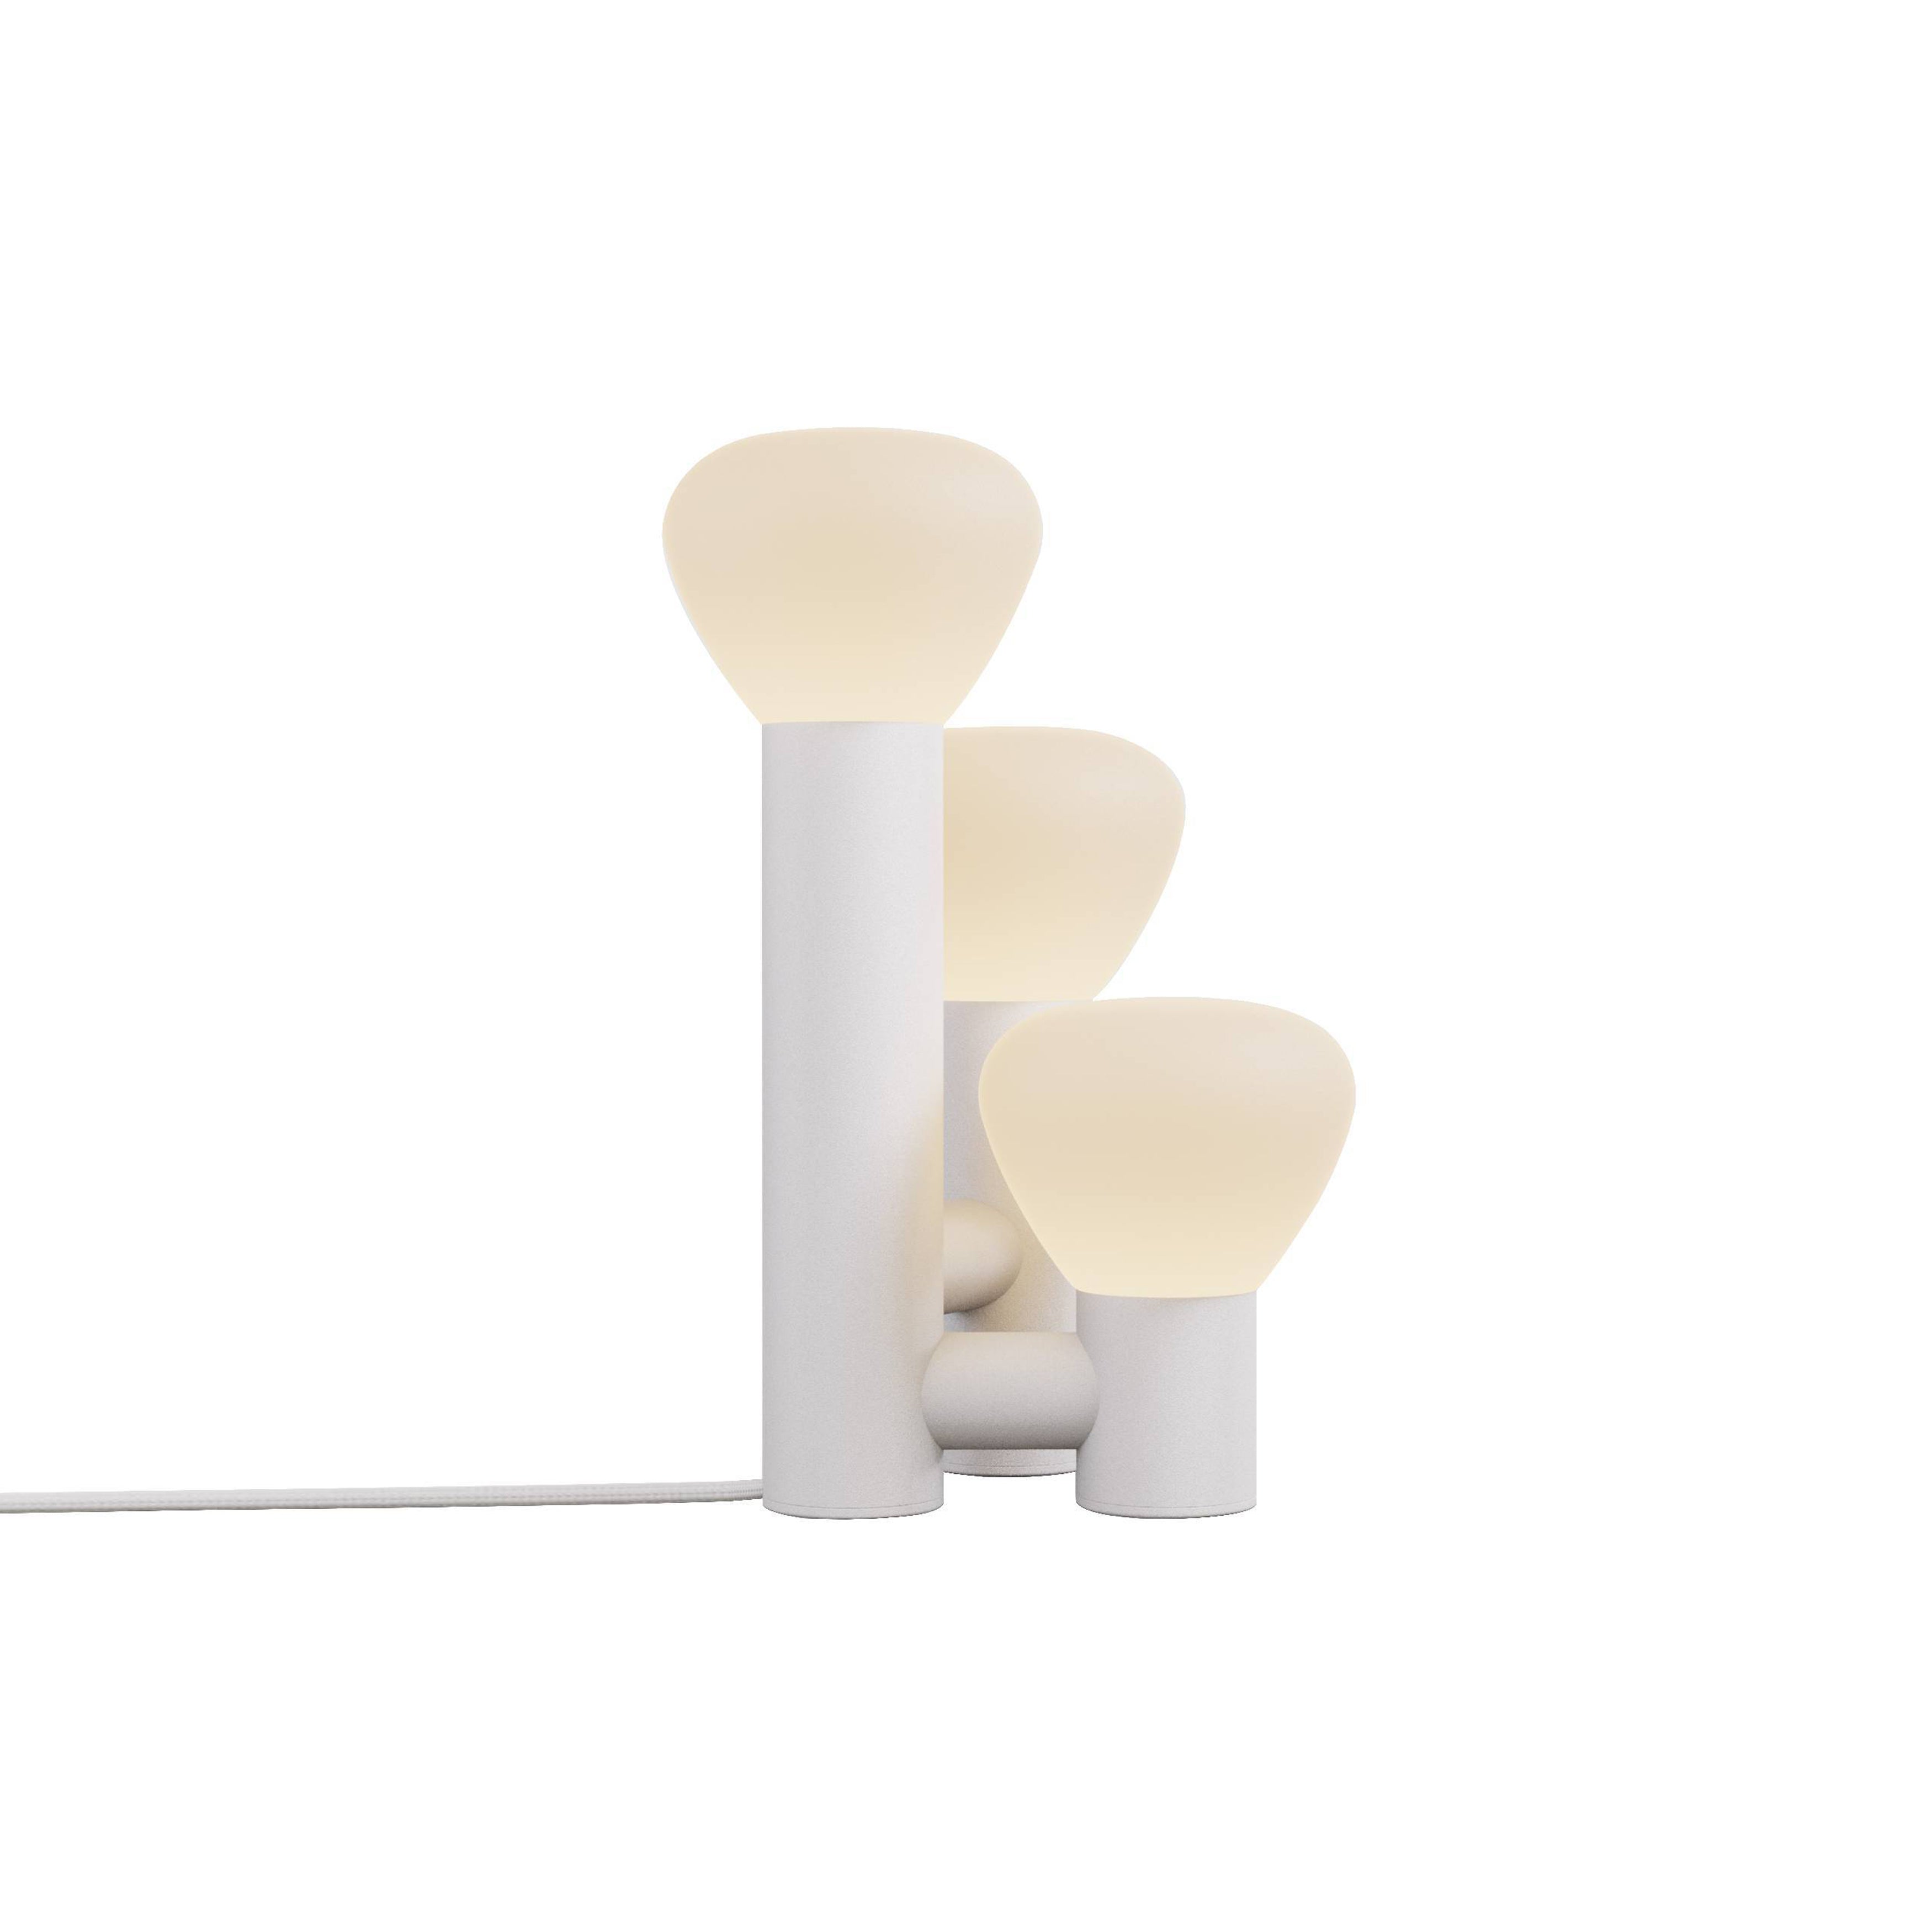 Parc 06 Table Lamp: Handswitch + White + White